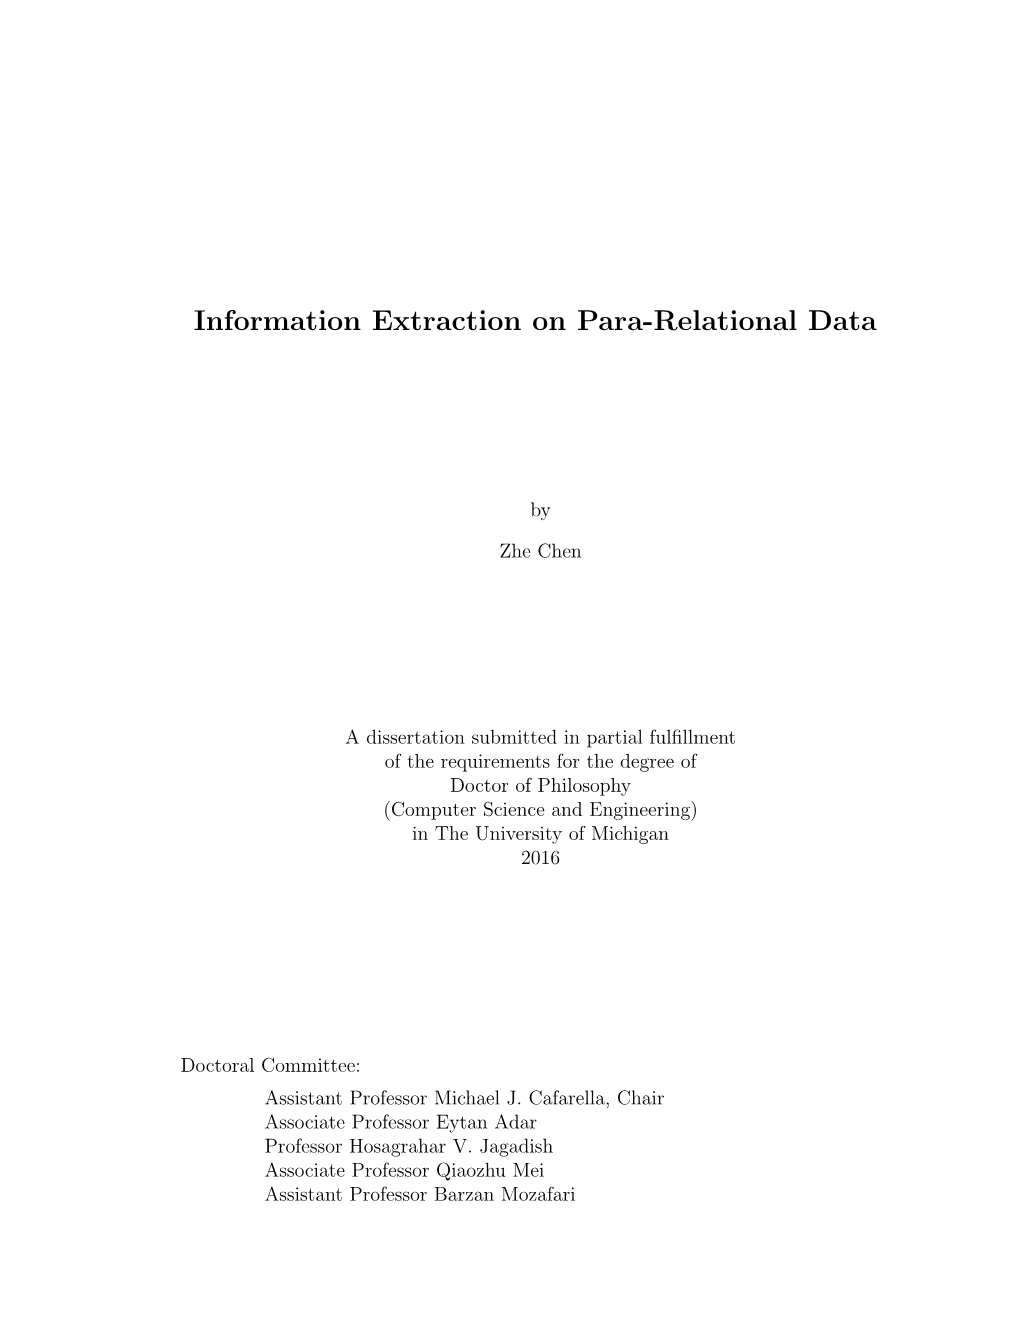 Information Extraction on Para-Relational Data